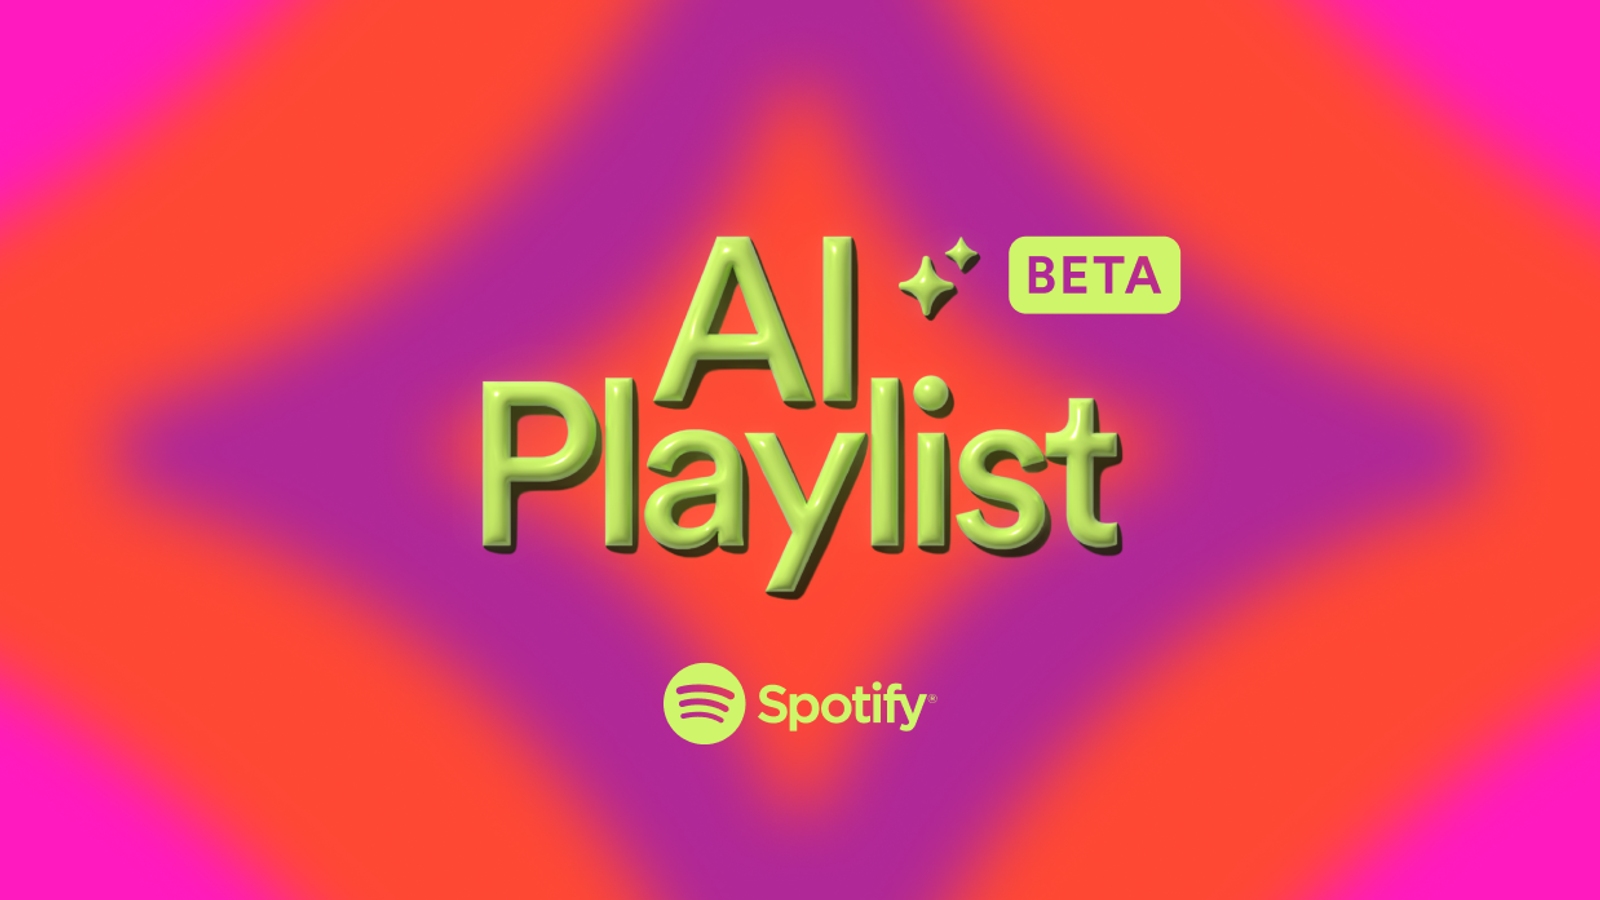 Spotify launches AI playlist: Build a playlist using text prompts